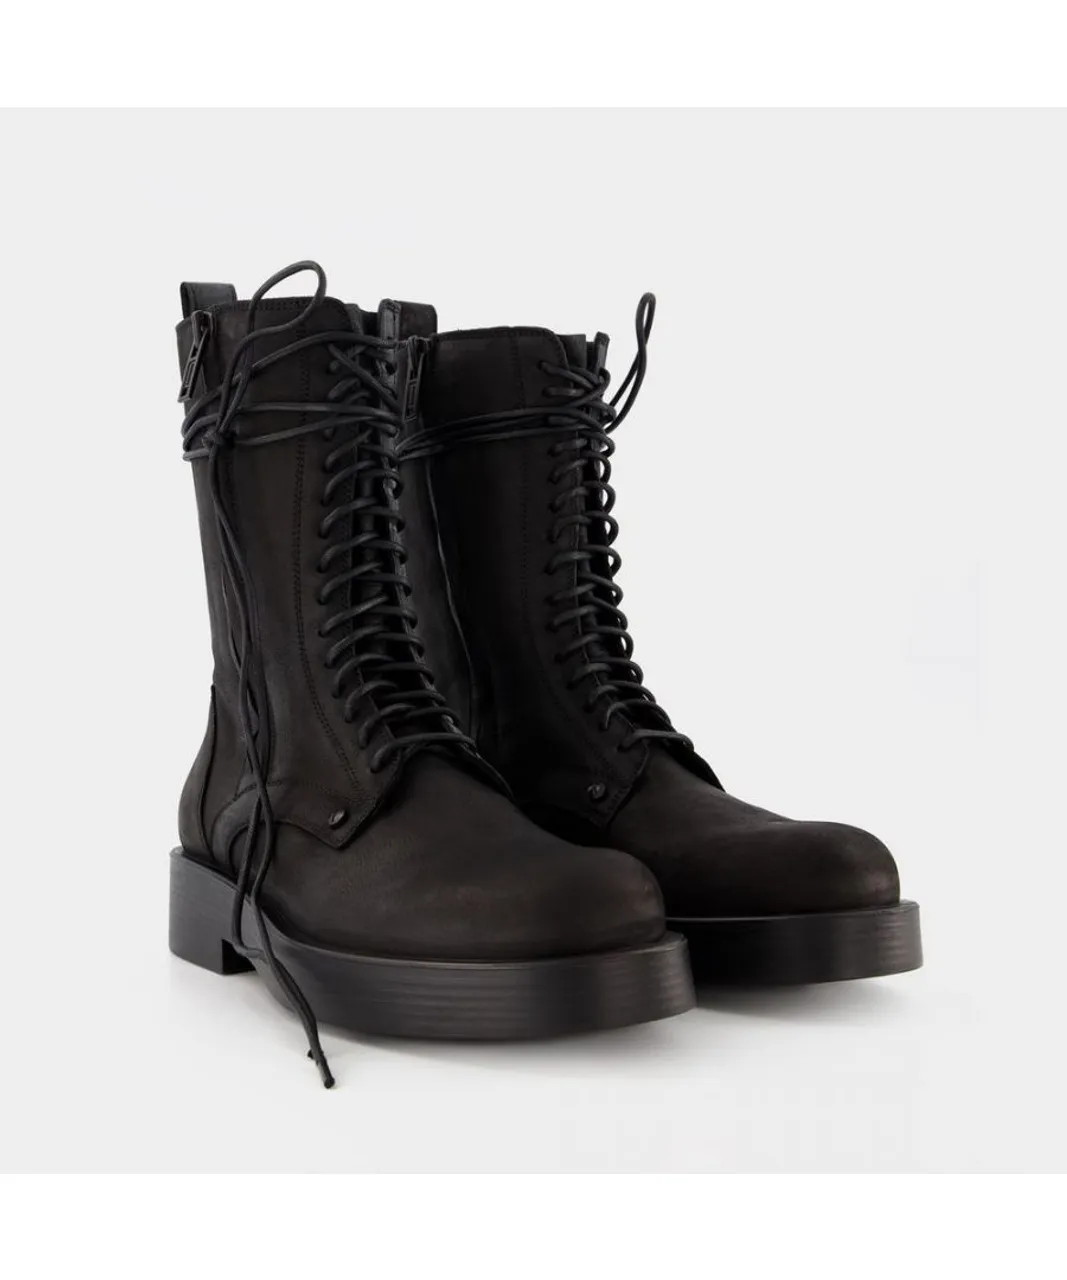 Ann Demeulemeester Mens Maxim Ankle Boots in Black Leather